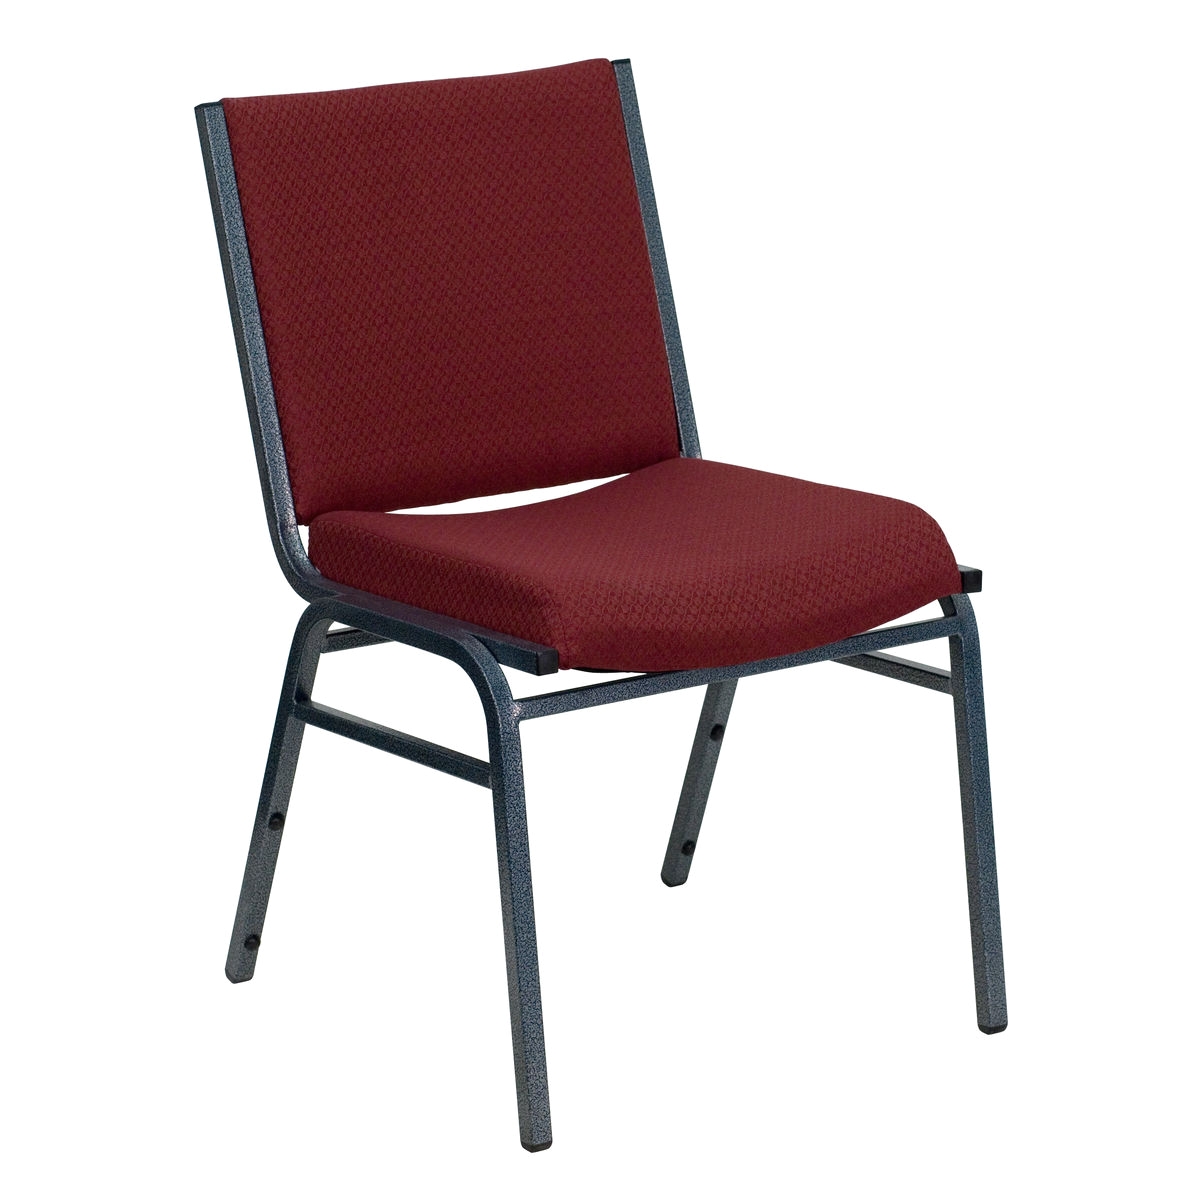 Hercules Series Stacking Chairs Burgundy Fabric Stack Chair Xu 60153 by Gg Schoolfurniture4less Com